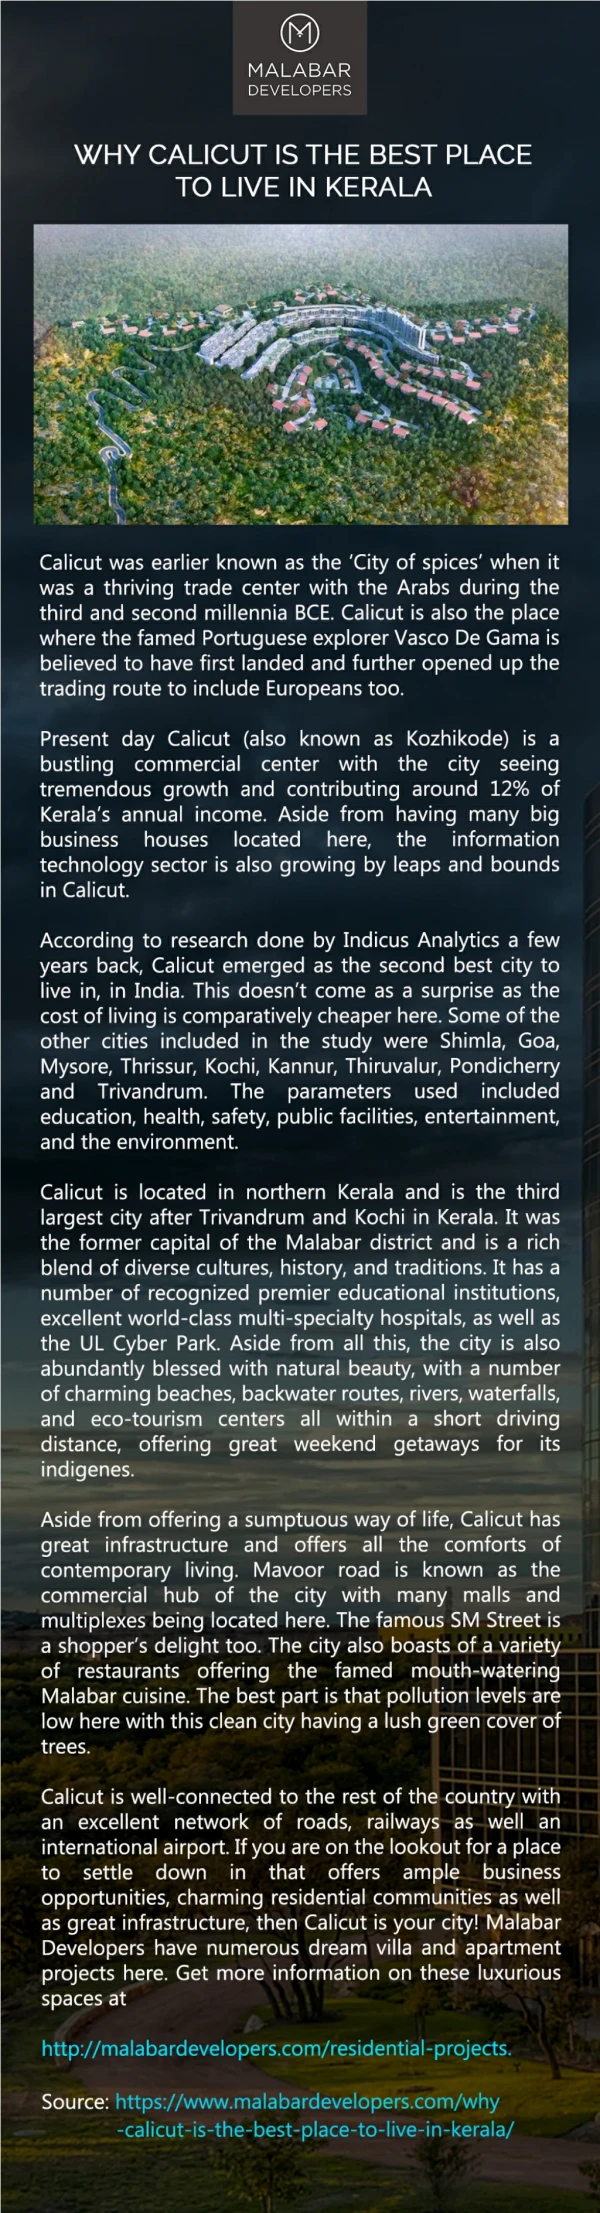 Calicut Is the Best Place to Live in Kerala | Malabar Developers